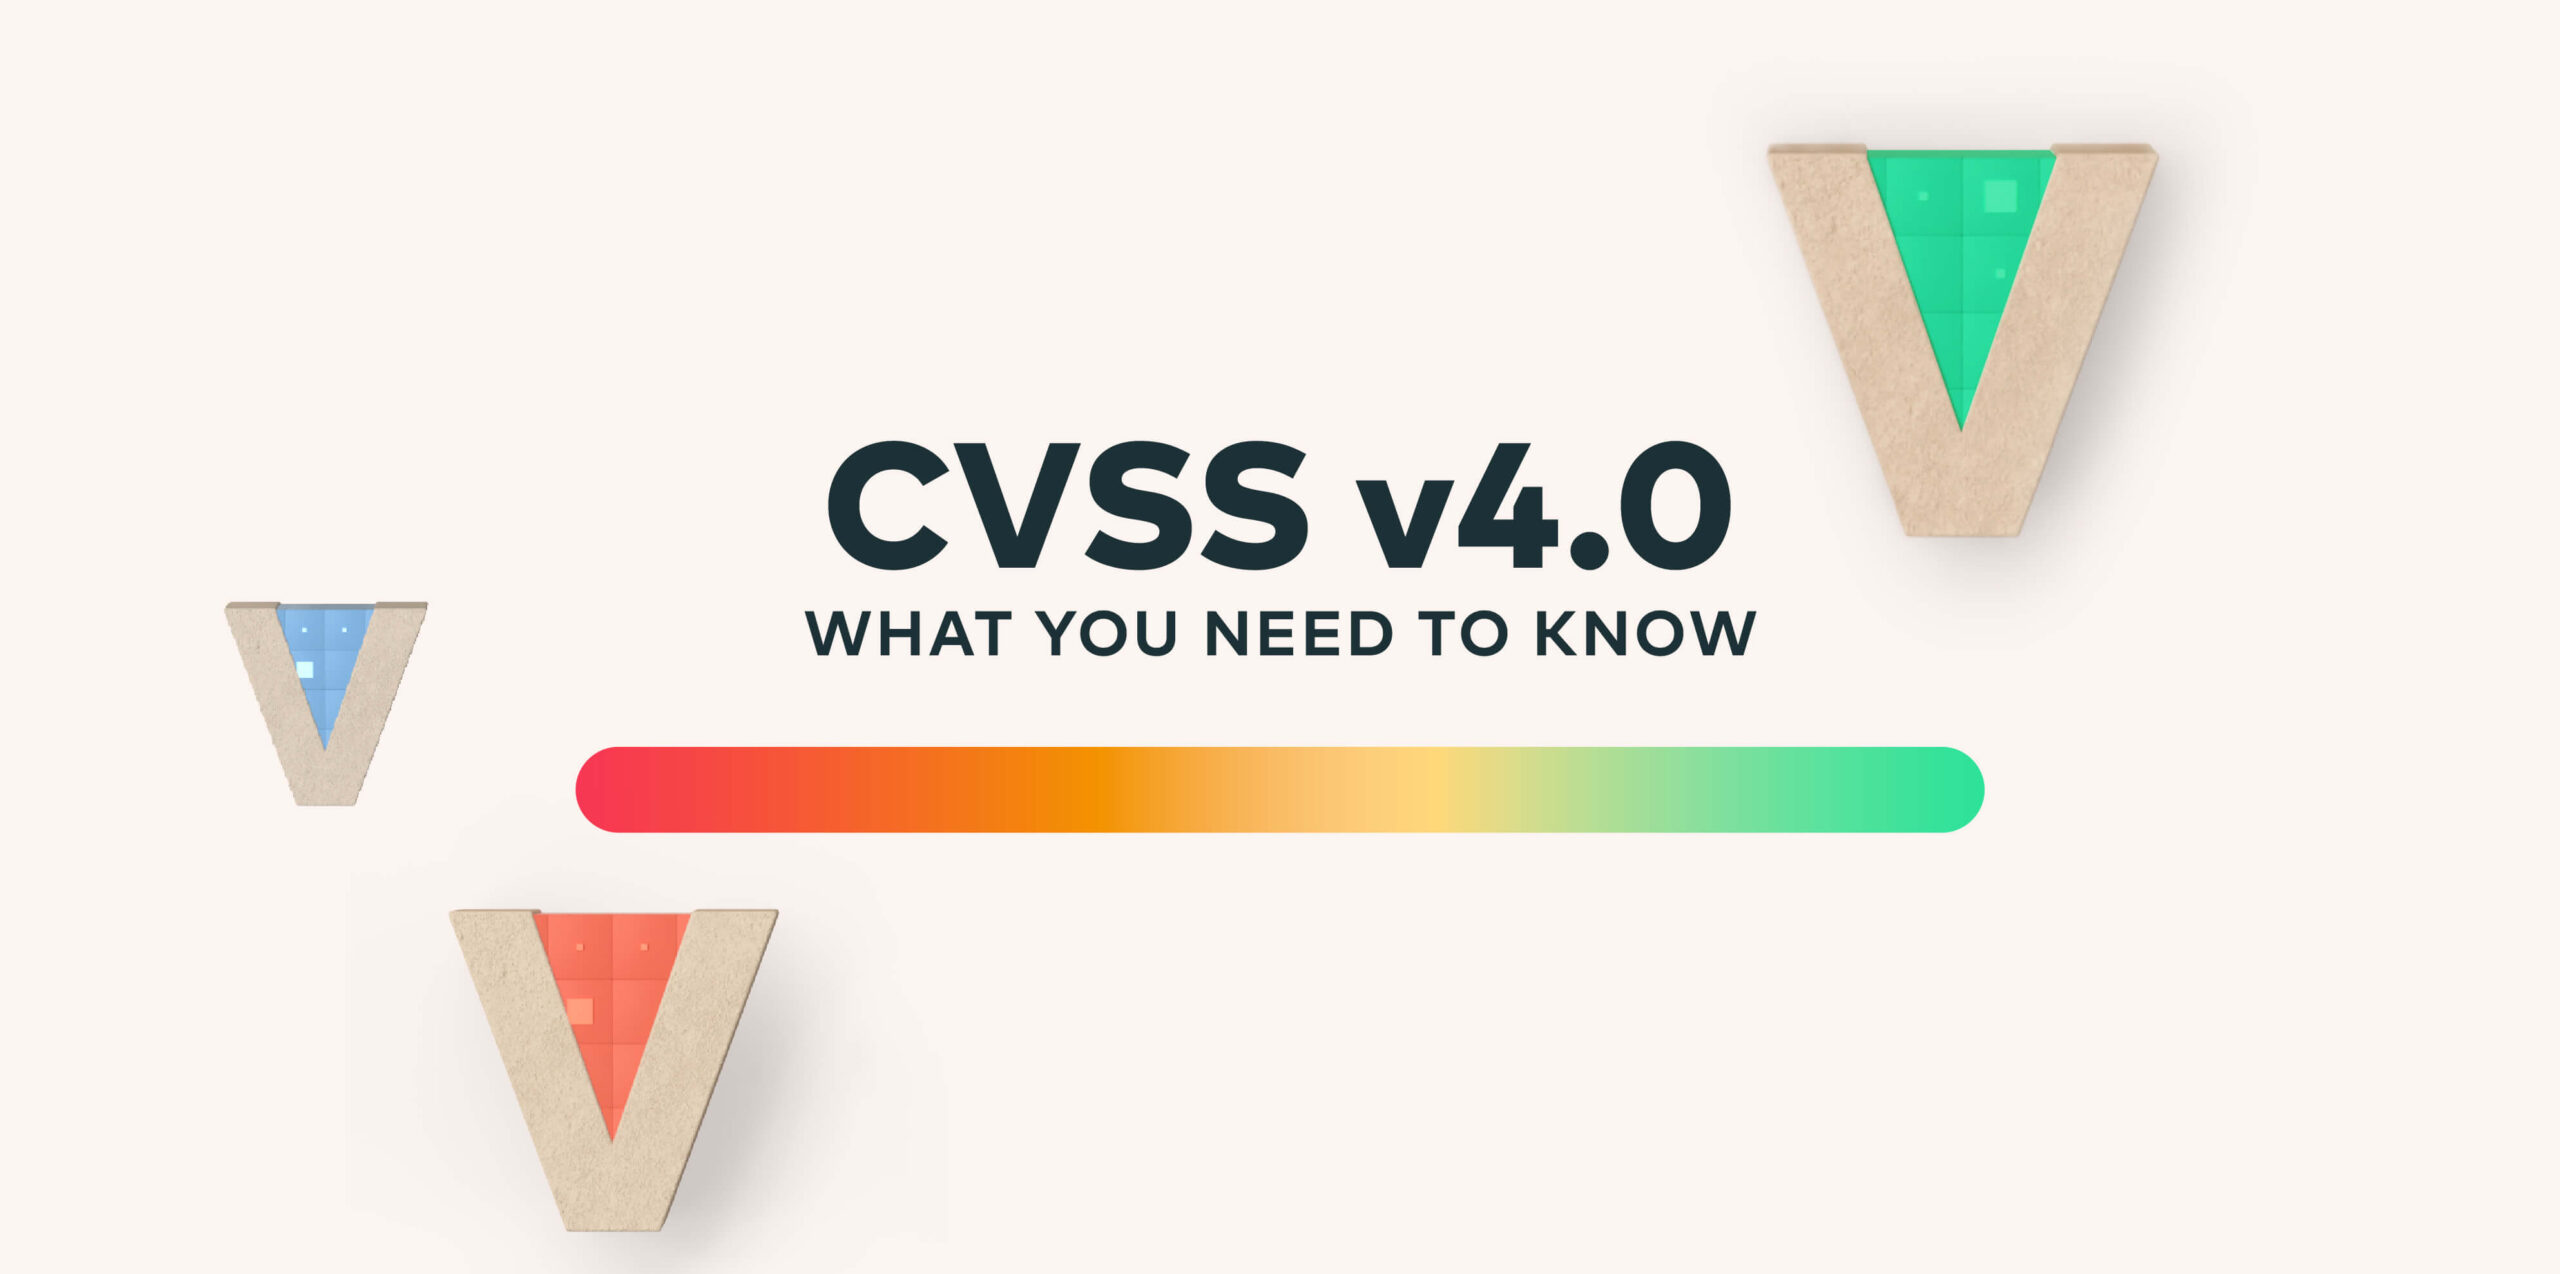 CVSS v4.0 is here – what you need to know